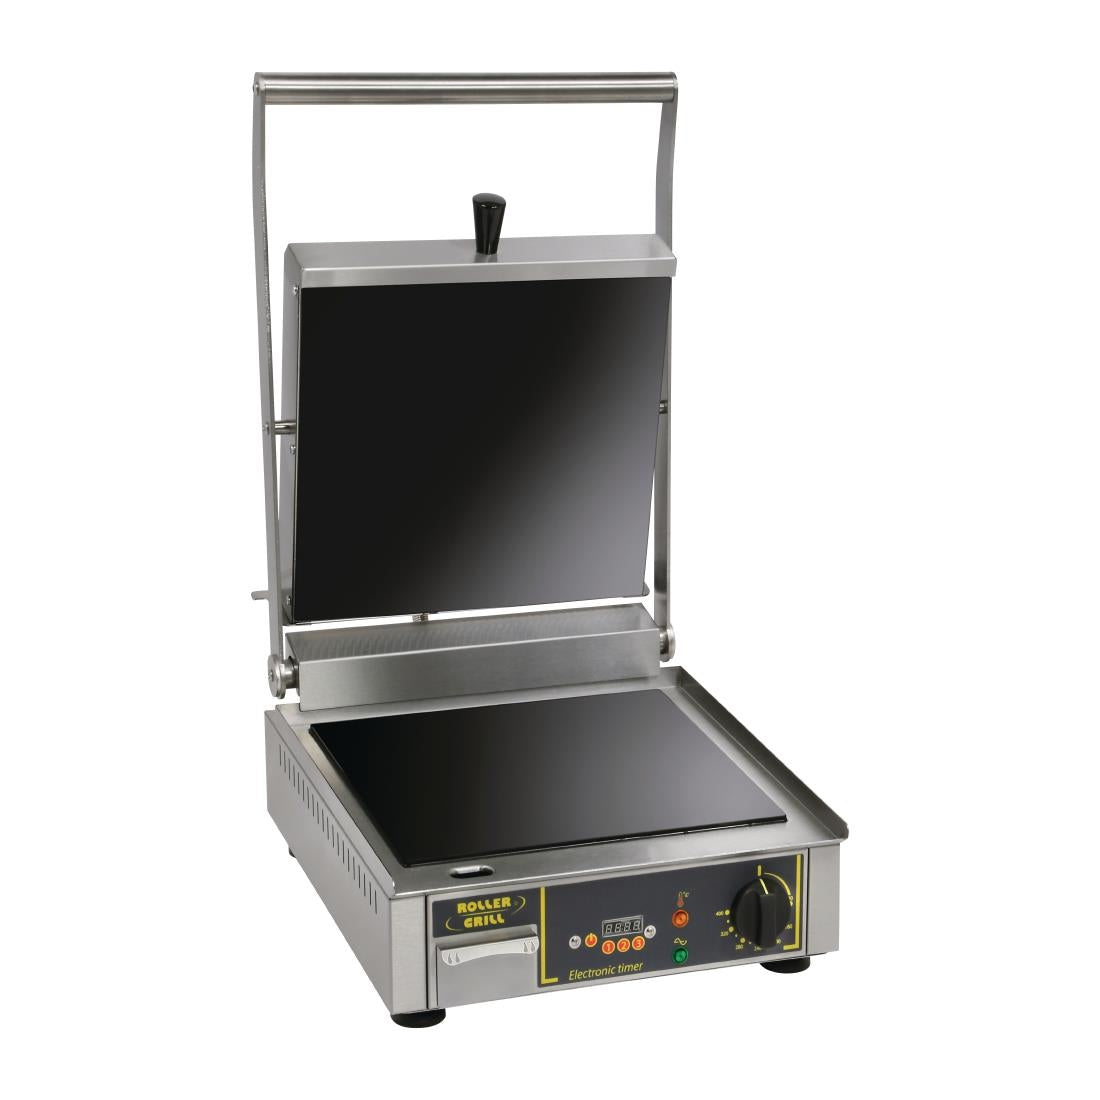 FE146 Roller Grill Premium VC FT Single Ribbed Contact Grill JD Catering Equipment Solutions Ltd